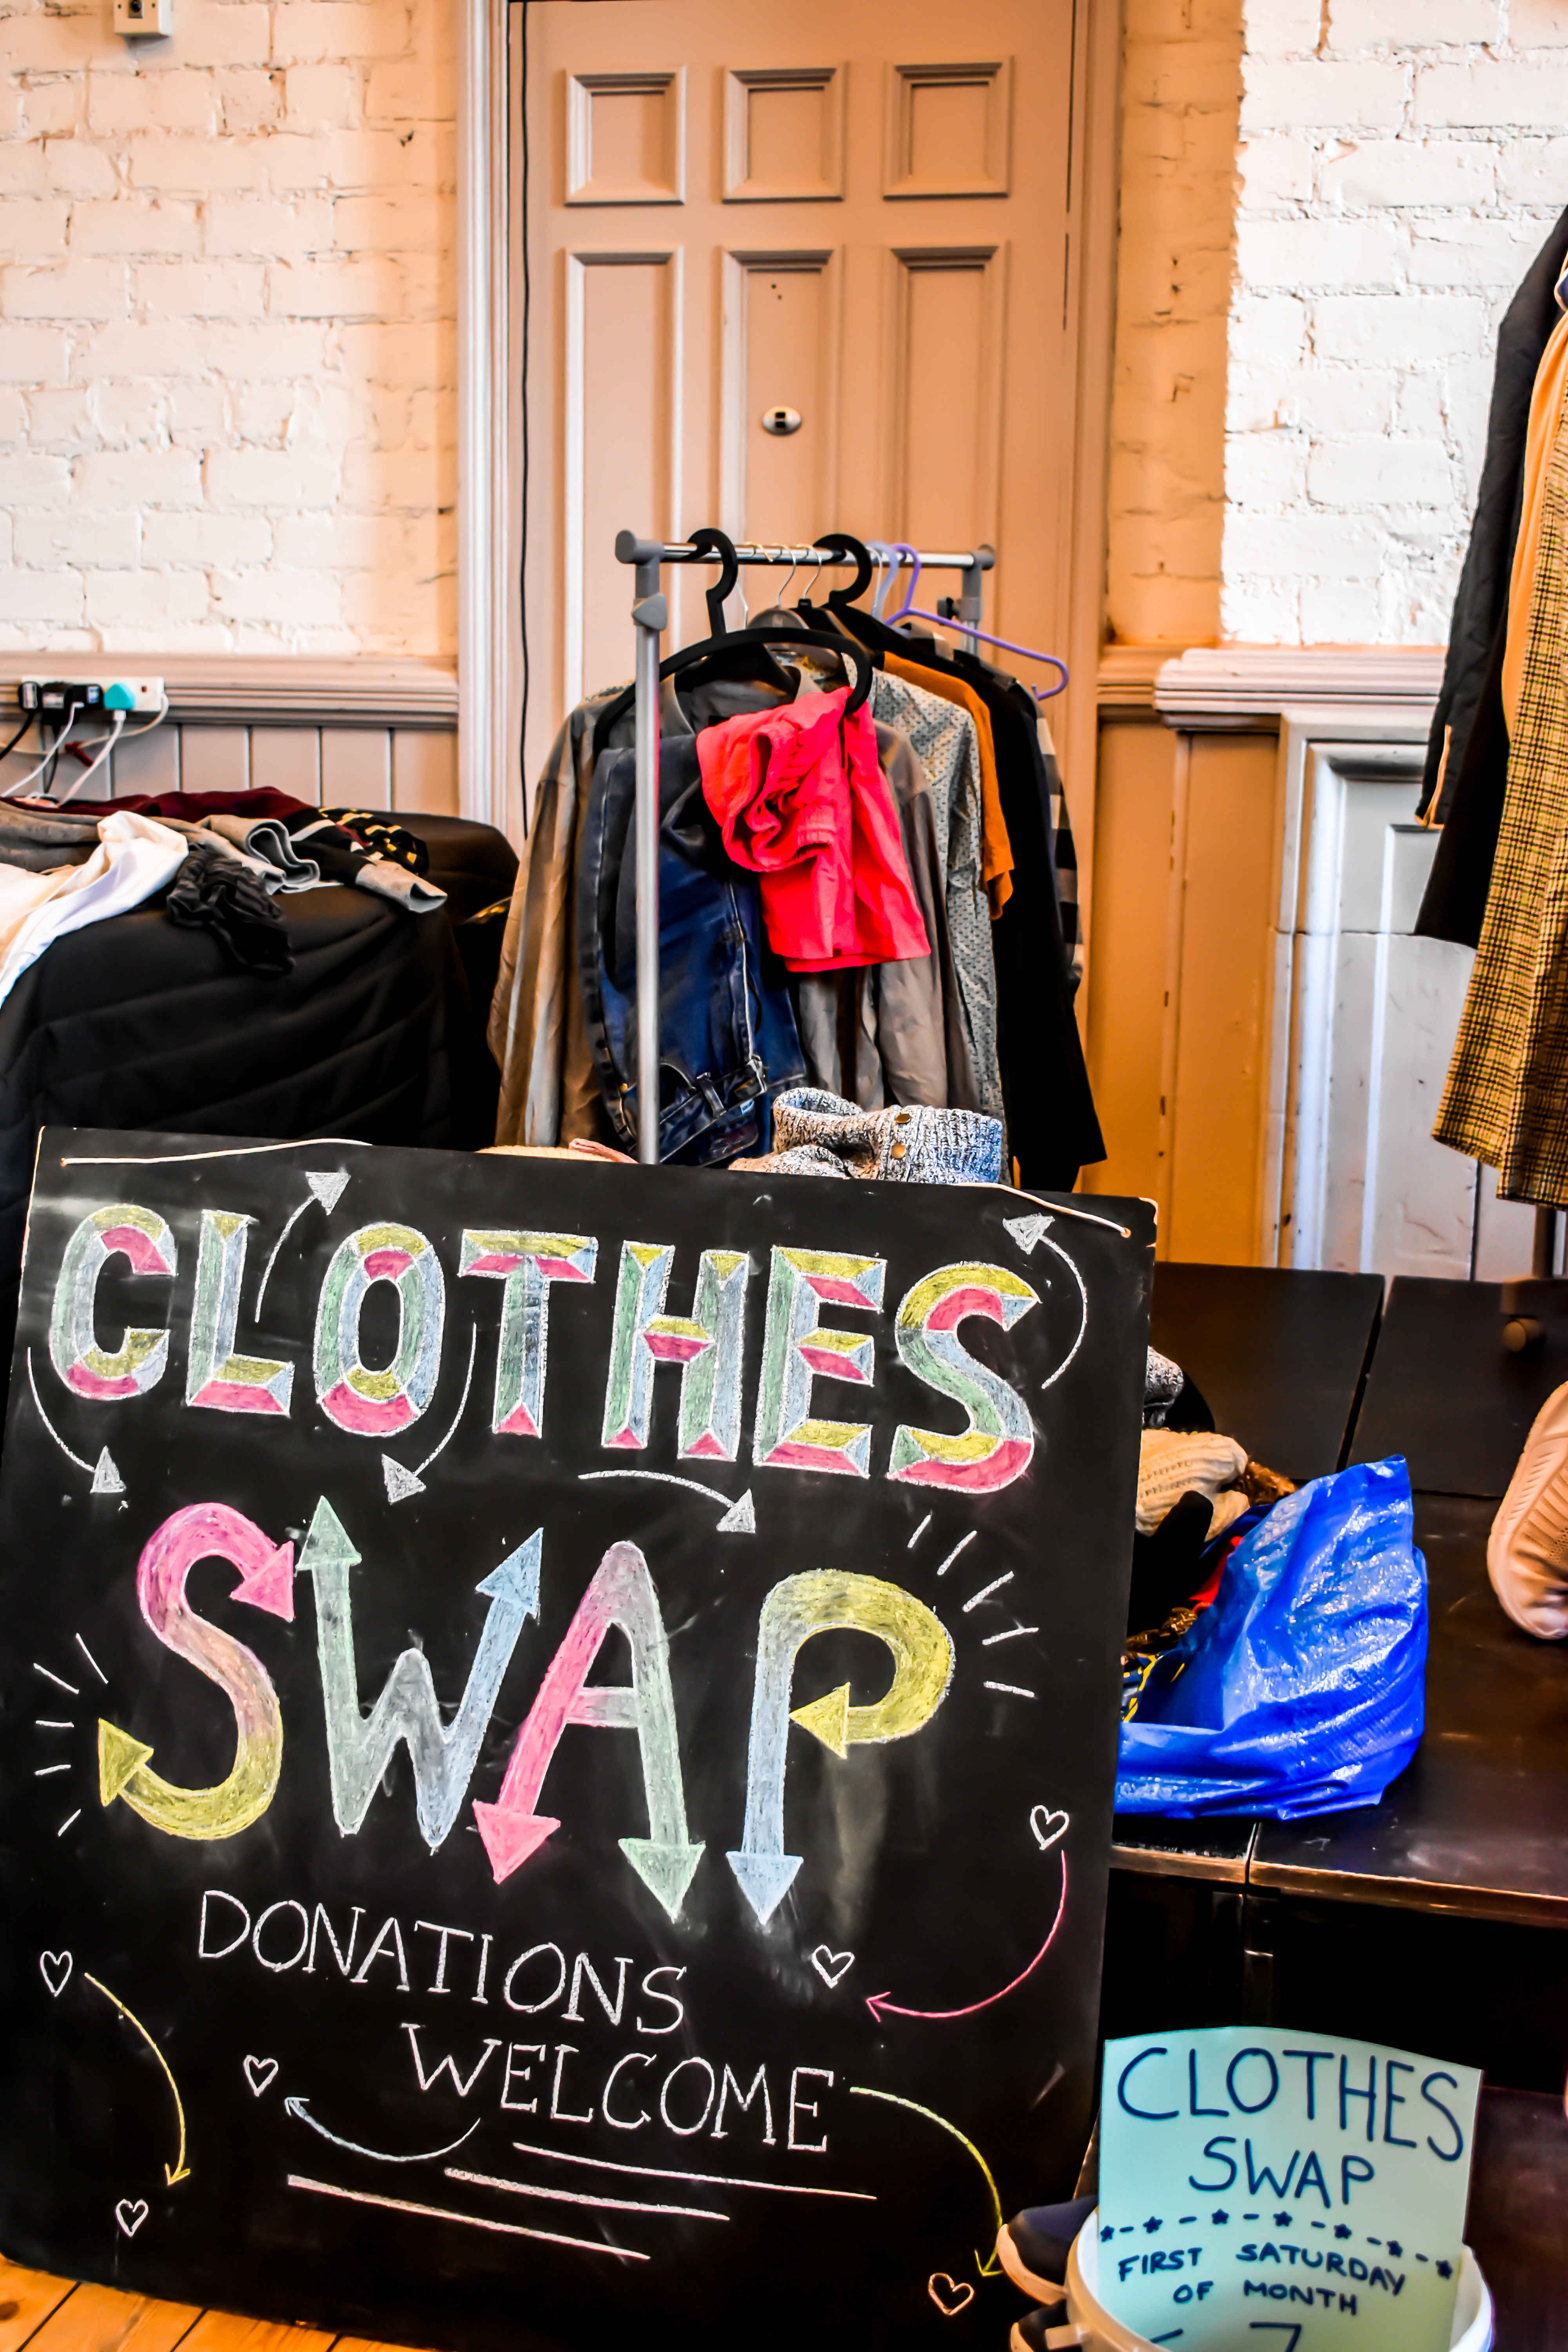 A chalkboard wih the words 'Clothes Swap, Donations welcome' written on in coloured chalk. Behind the sign are rails of clothes.